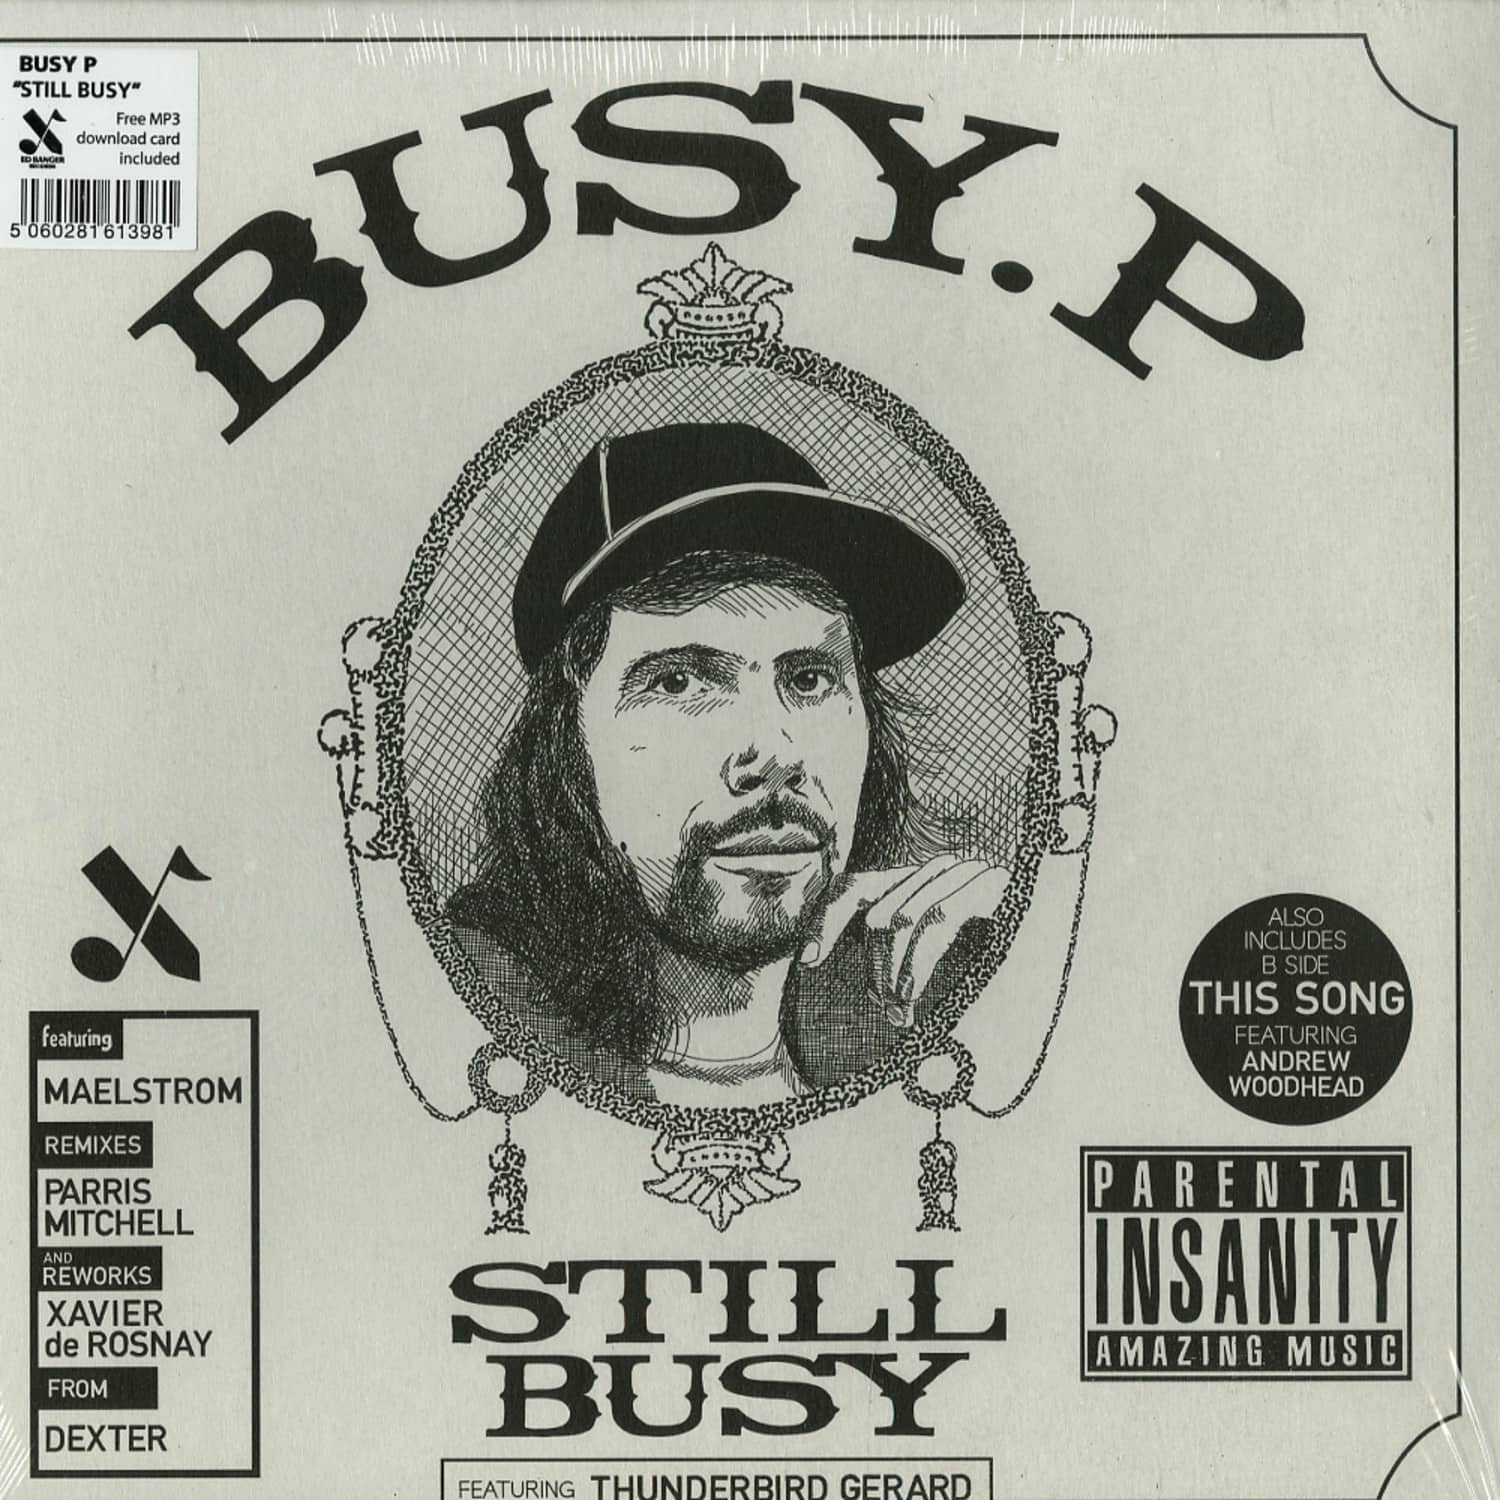 Busy P - STILL BUSY EP 